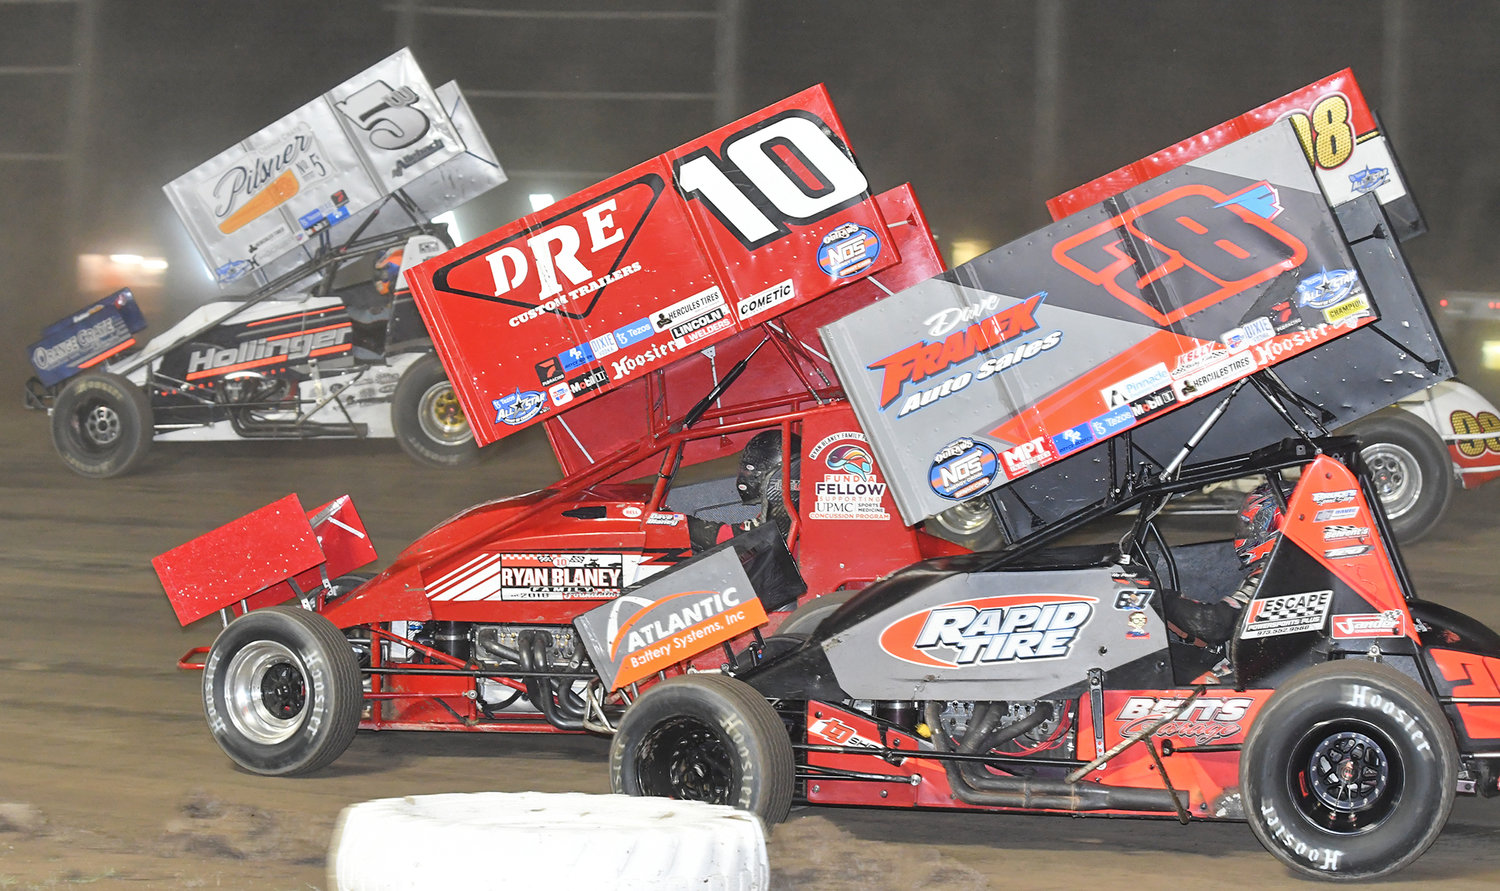 TIGHT RACING — Lucas Wolfe in the No. 5W, Dave Blaney in the No. 10, Davie Franek in the No. 28F and Joe Trenca in the No. 98 on the outside battle it out in the first lap of the 410 Tezo All-Star Sprint Car Series race on Saturday night at Utica-Rome Speedway.